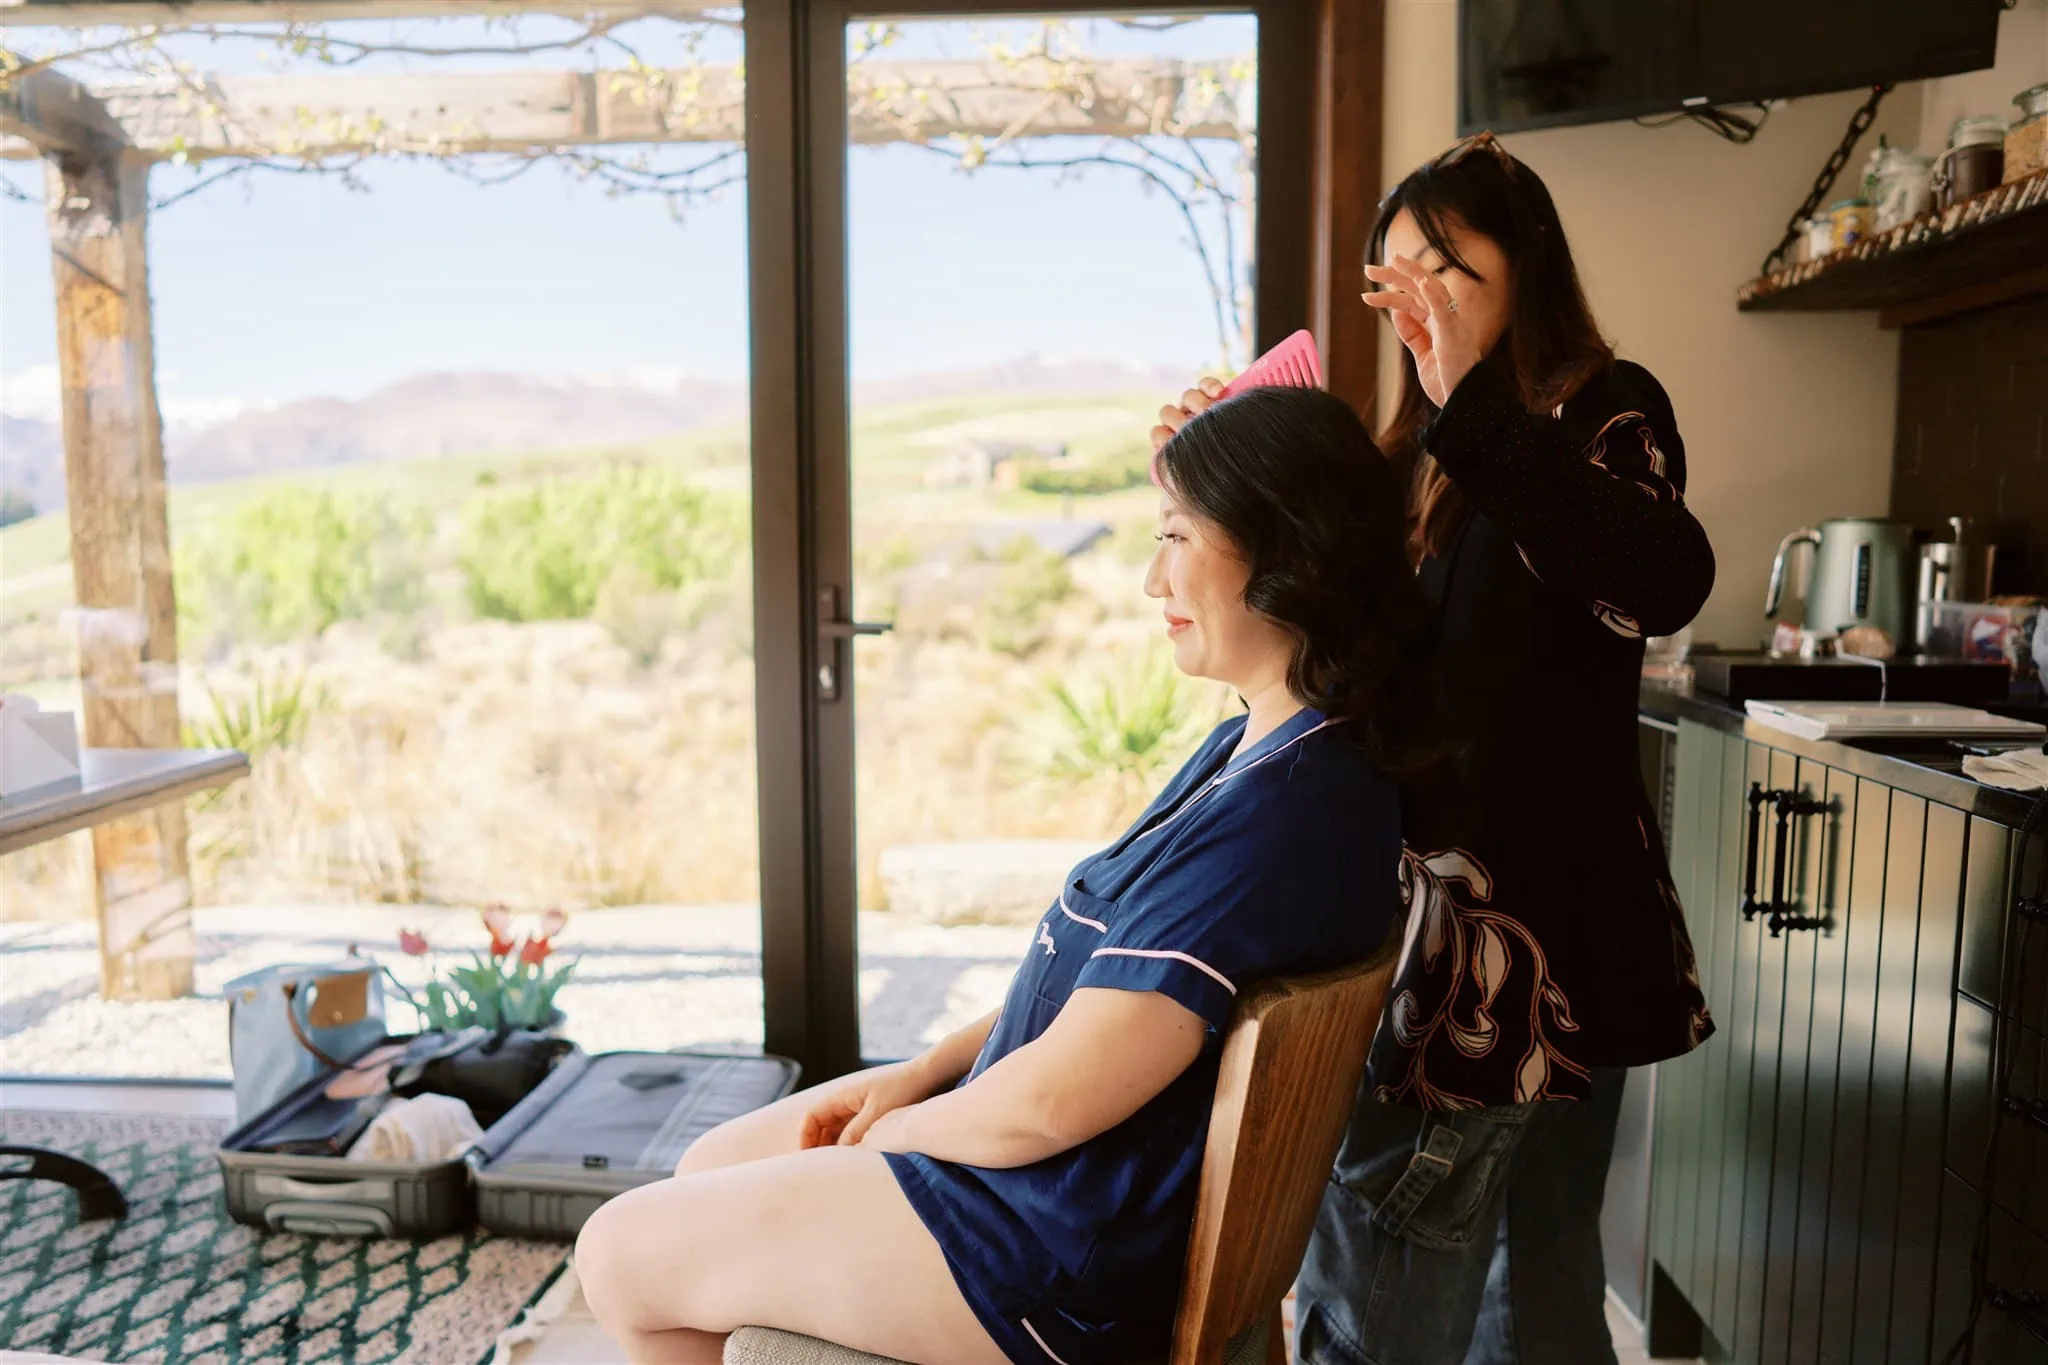 Queenstown Elopement Heli Wedding Photographer クイーンズタウン結婚式 | A woman getting her hair done in front of a window while planning an elopement with Alex & Michael at Roy's Peak.